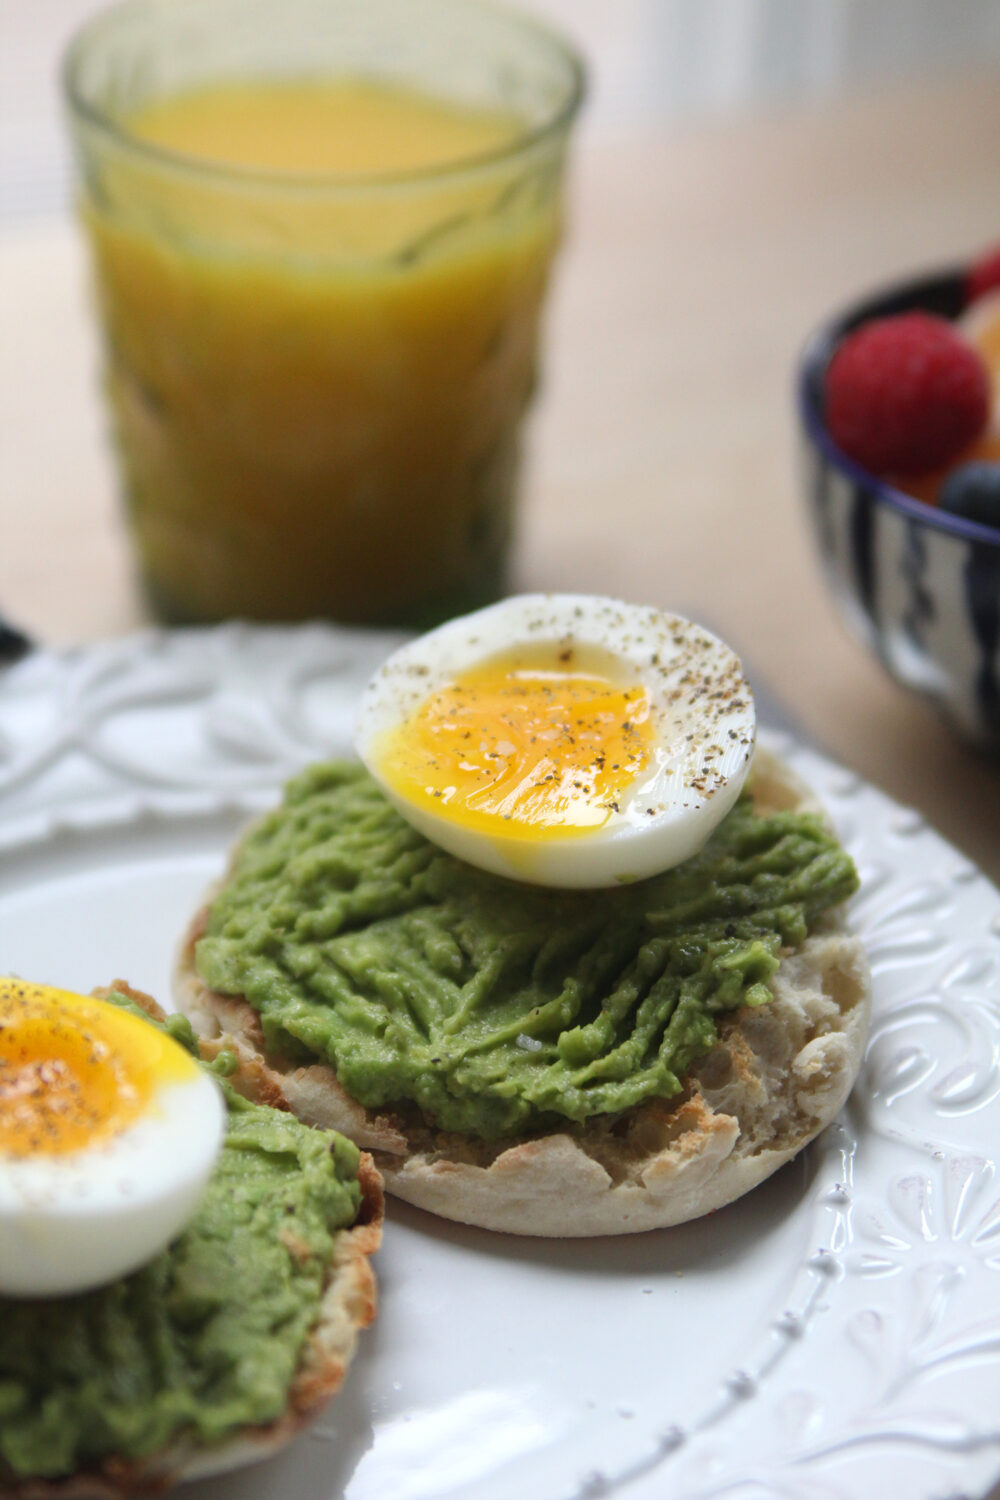 A white plate is shown with two English muffin halves topped with mushed avocado and soft boiled eggs that have been seasoned with salt and pepper. A glass of orange juice is shown in the background.